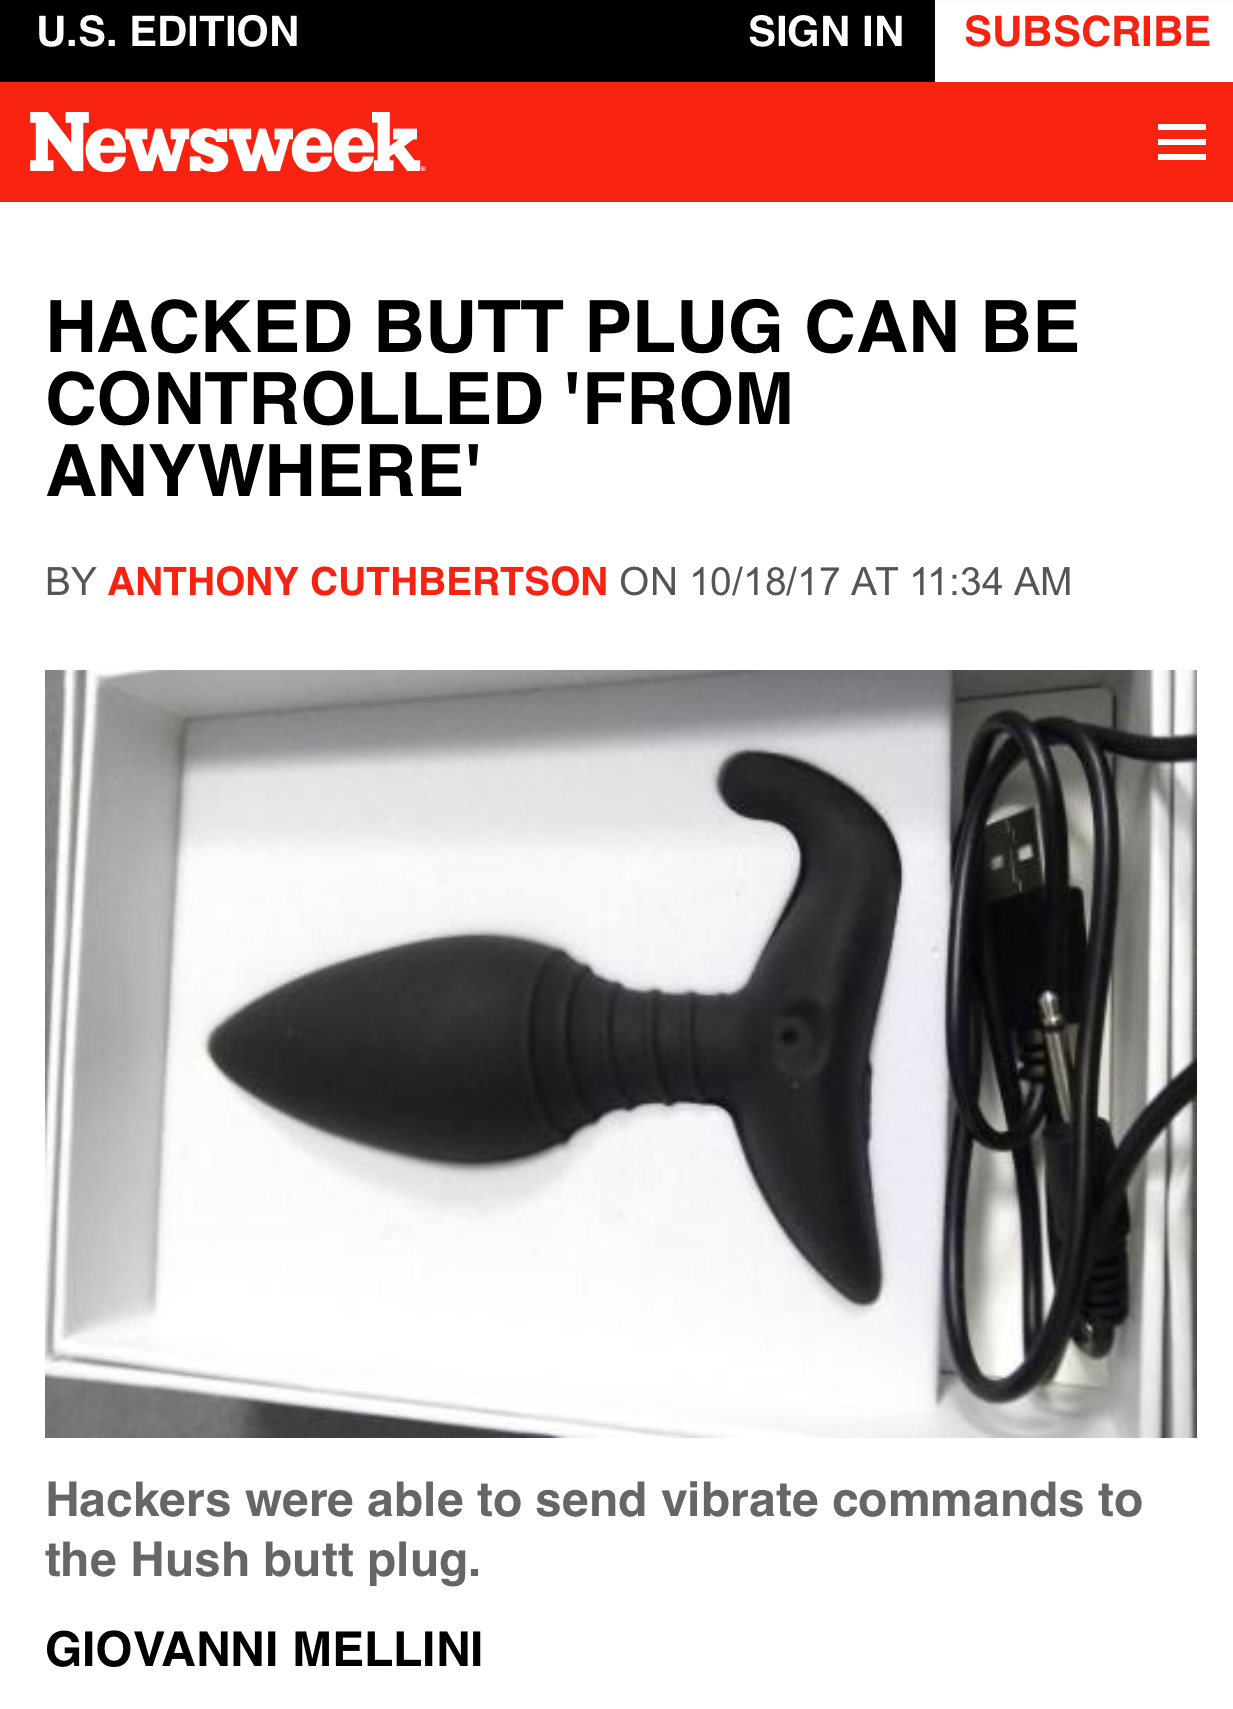 tool - Sign In Subscribe U.S. Edition Newsweek Hacked Butt Plug Can Be Controlled 'From Anywhere By Anthony Cuthbertson On 101817 At Hackers were able to send vibrate commands to the Hush butt plug. Giovanni Mellini